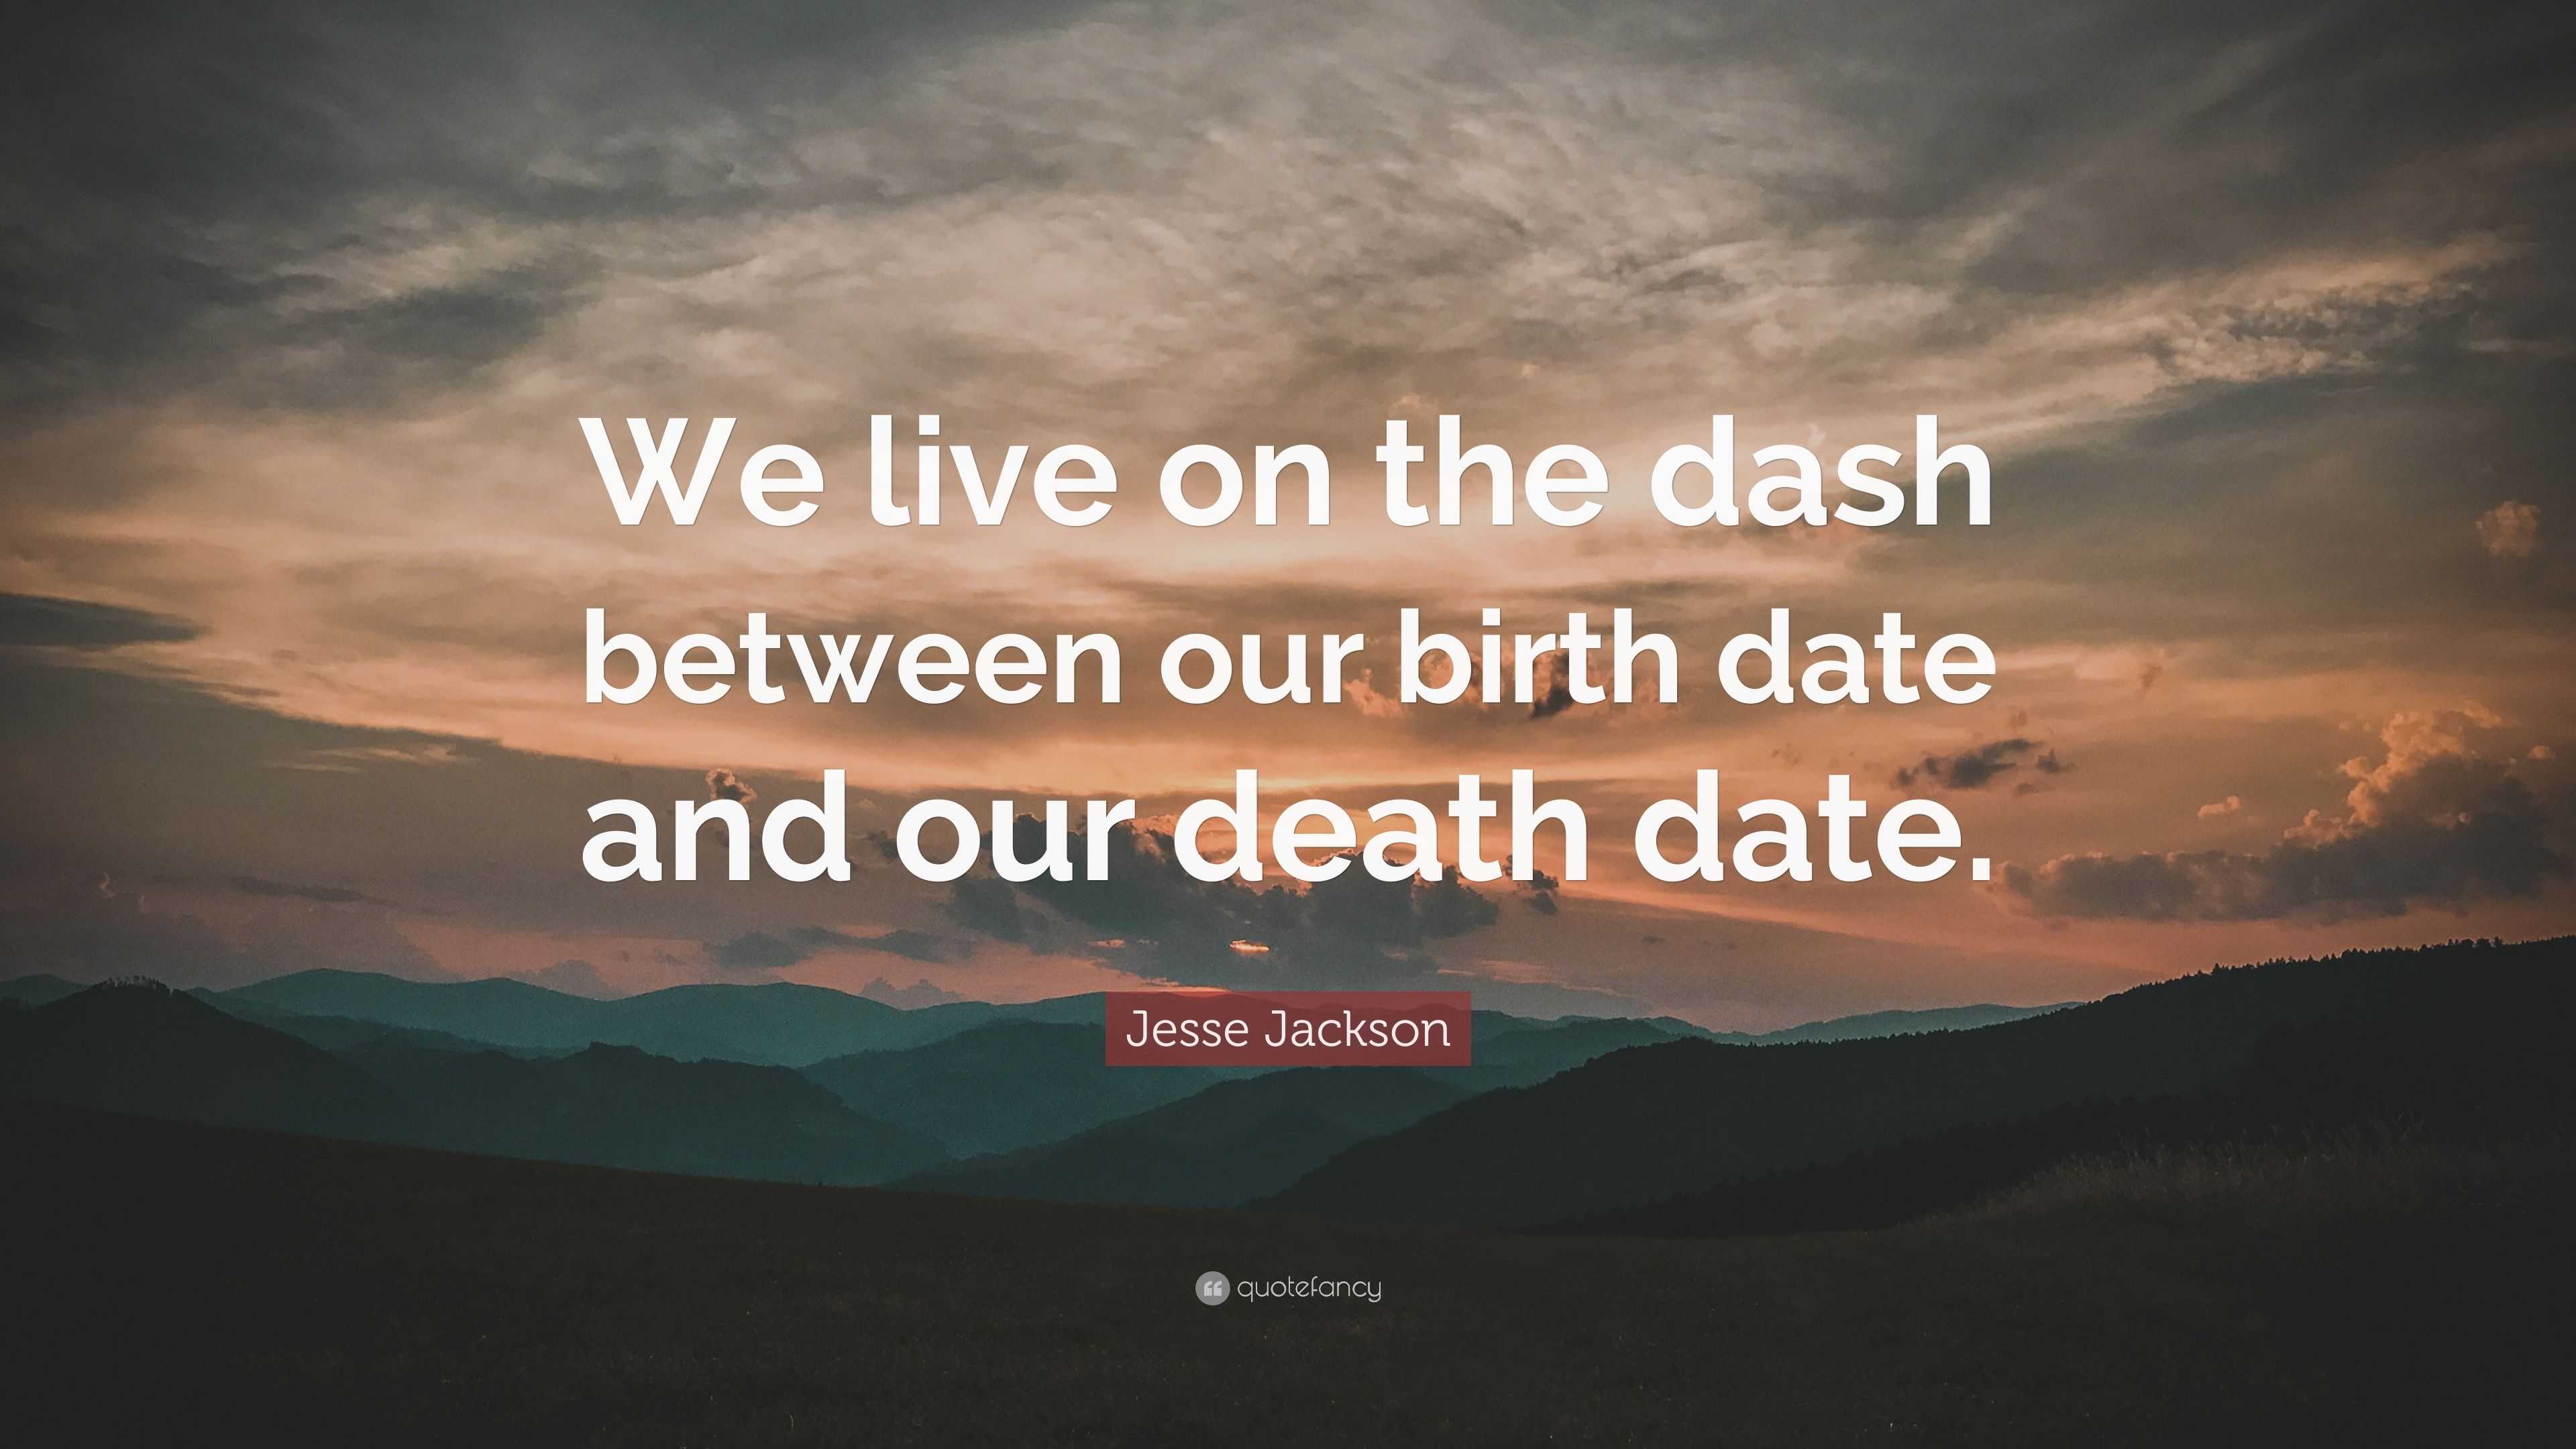 two dates and a dash poem